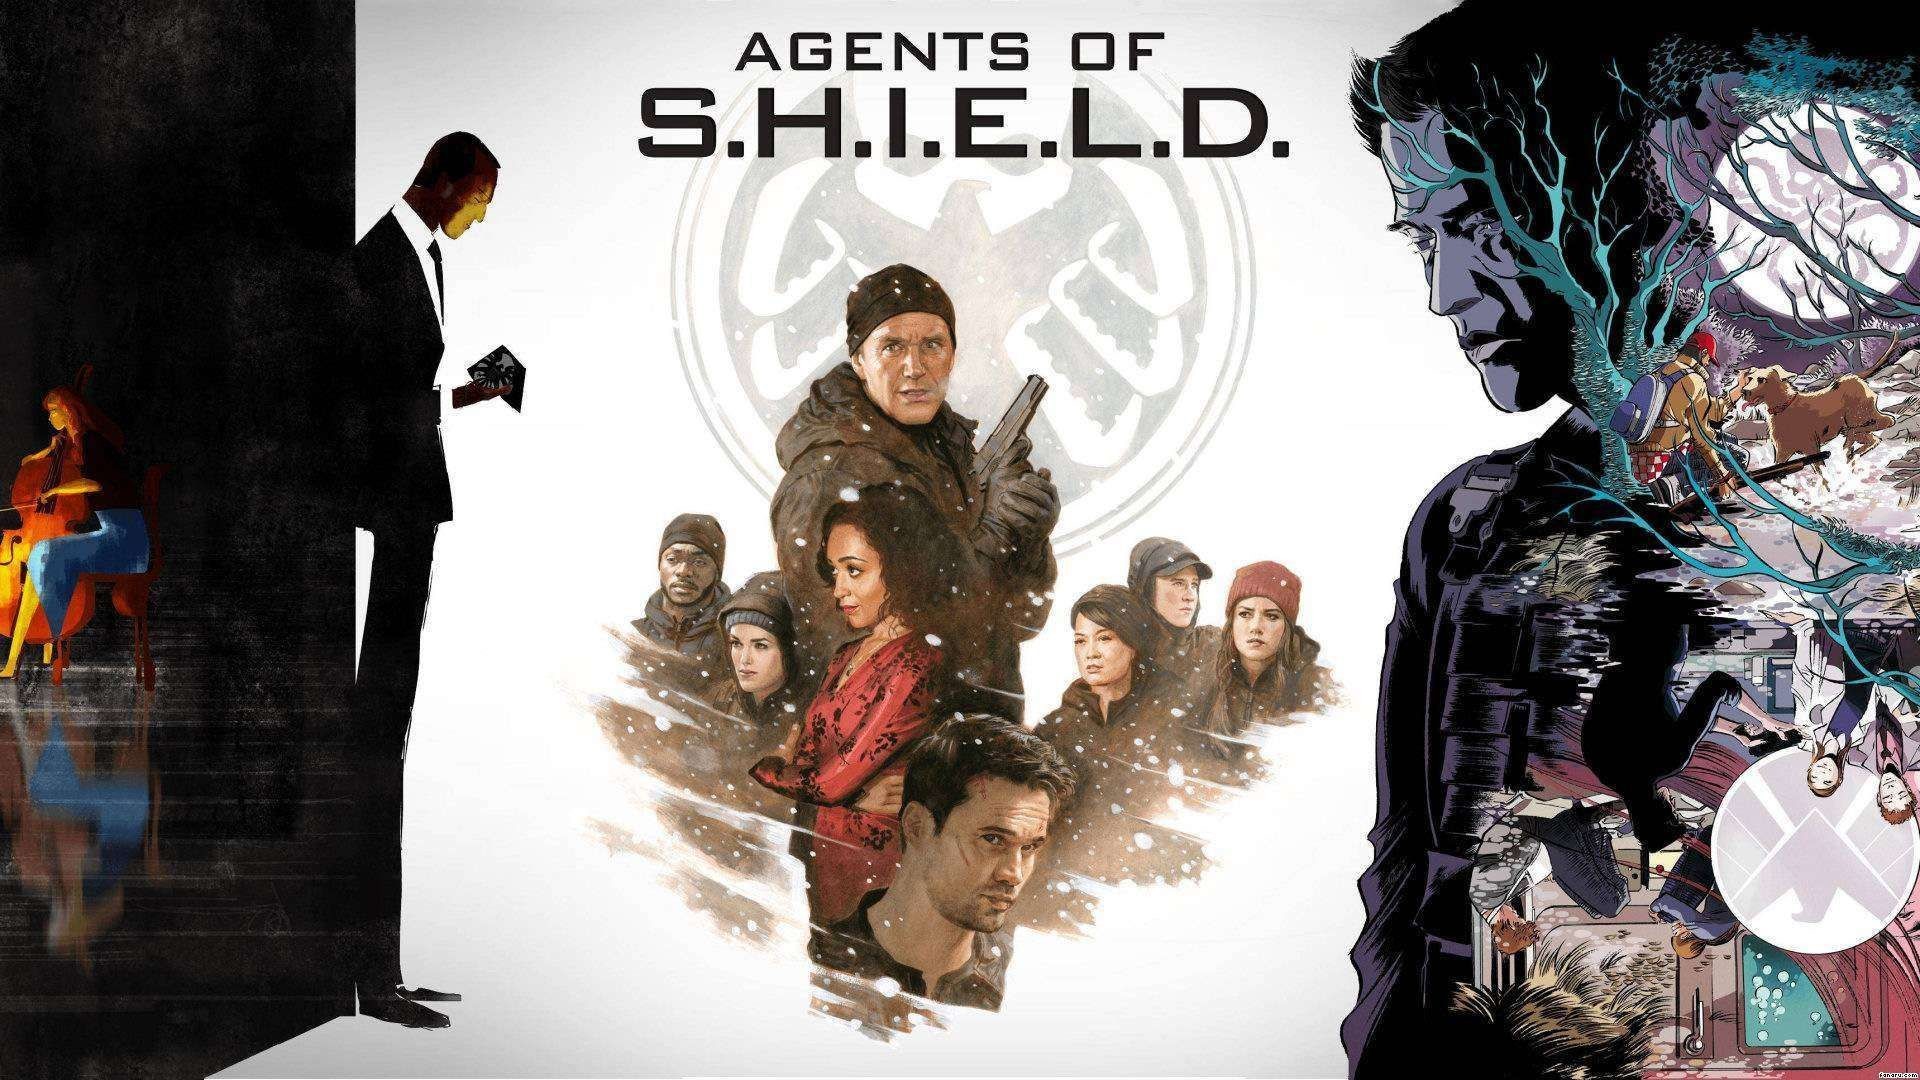 1920x1080 Agents Of Shield Desktop Wallpapers Â» Agents Of Shield Images for PC & Mac,  Laptop